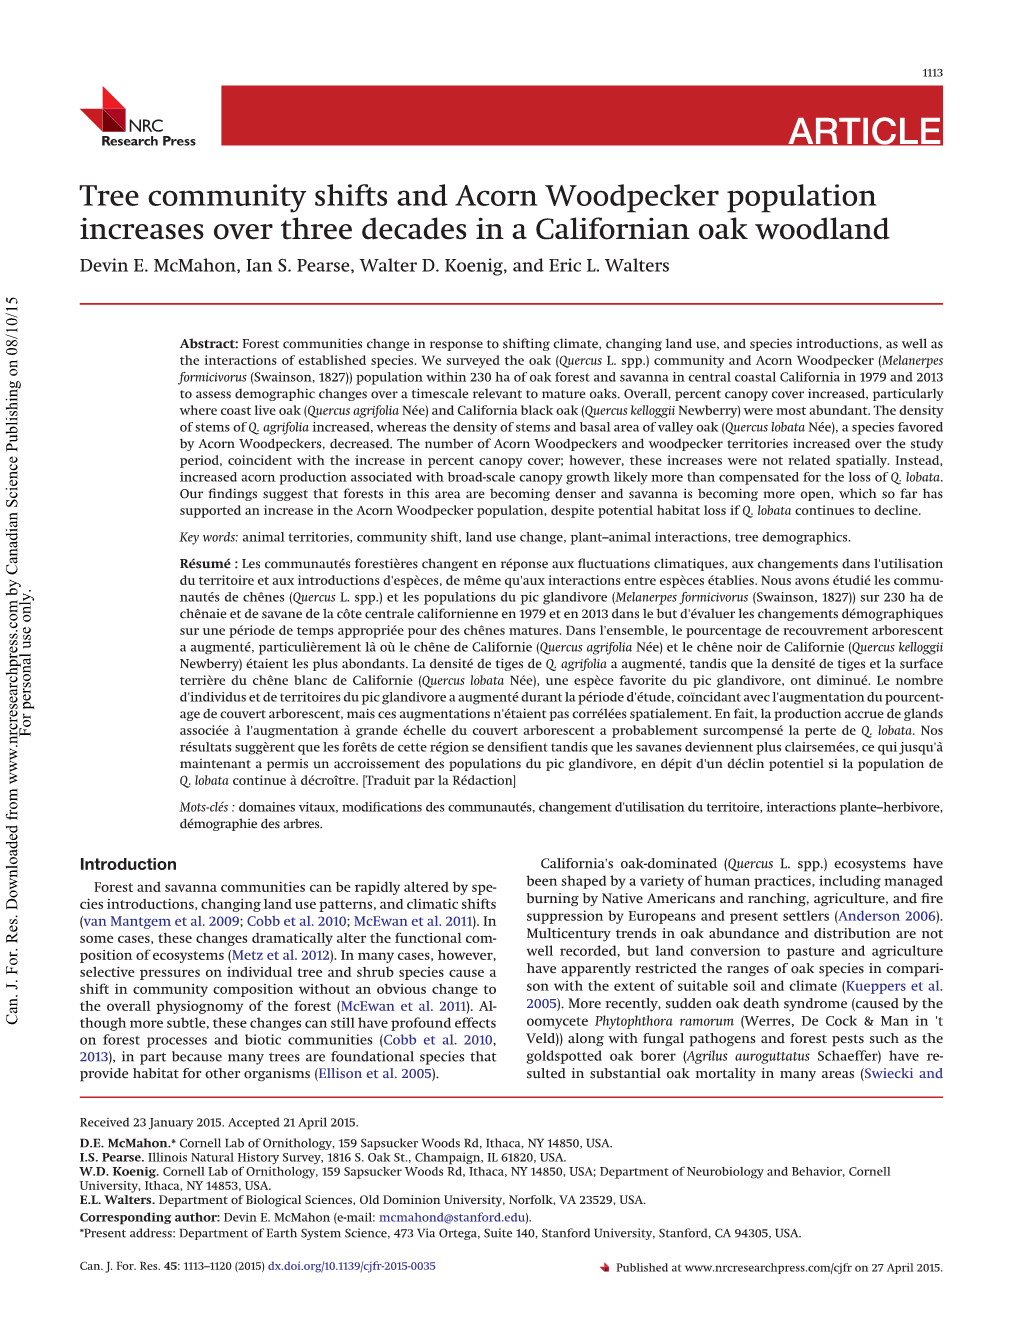 Tree Community Shifts and Acorn Woodpecker Population Increases Over Three Decades in a Californian Oak Woodland Devin E